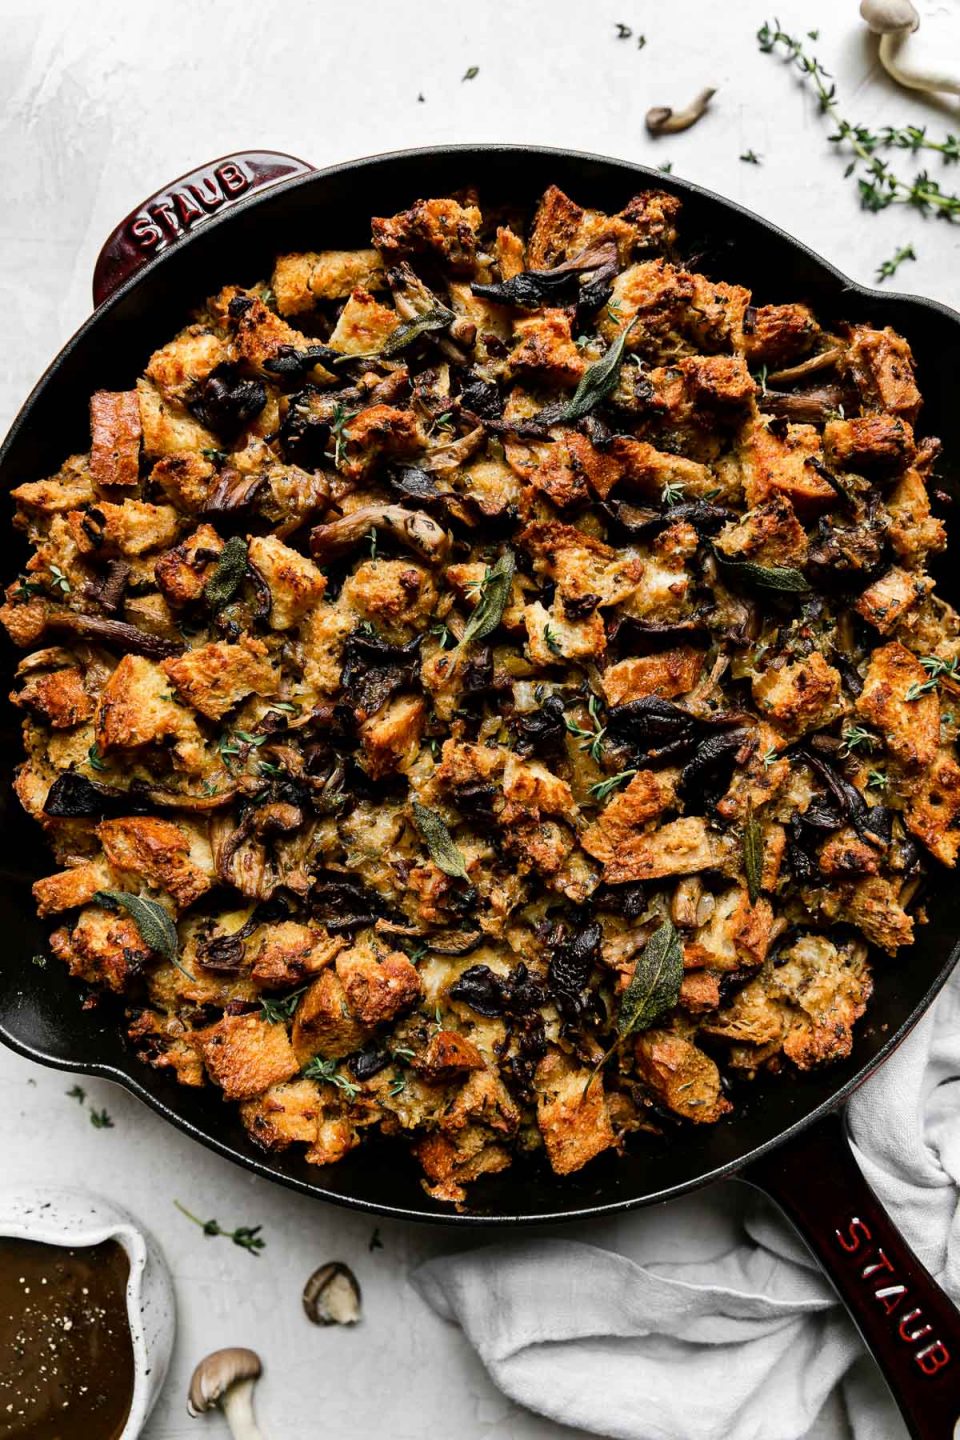 Baked wild mushroom stuffing fills a Grenadine colored Staub Cast Iron Skillet that sits atop a creamy white textured surface. A light gray linen napkin, loose raw wild mushrooms, sprigs of fresh herbs, and a small ceramic bowl filled with gravy sits alongside the skillet.